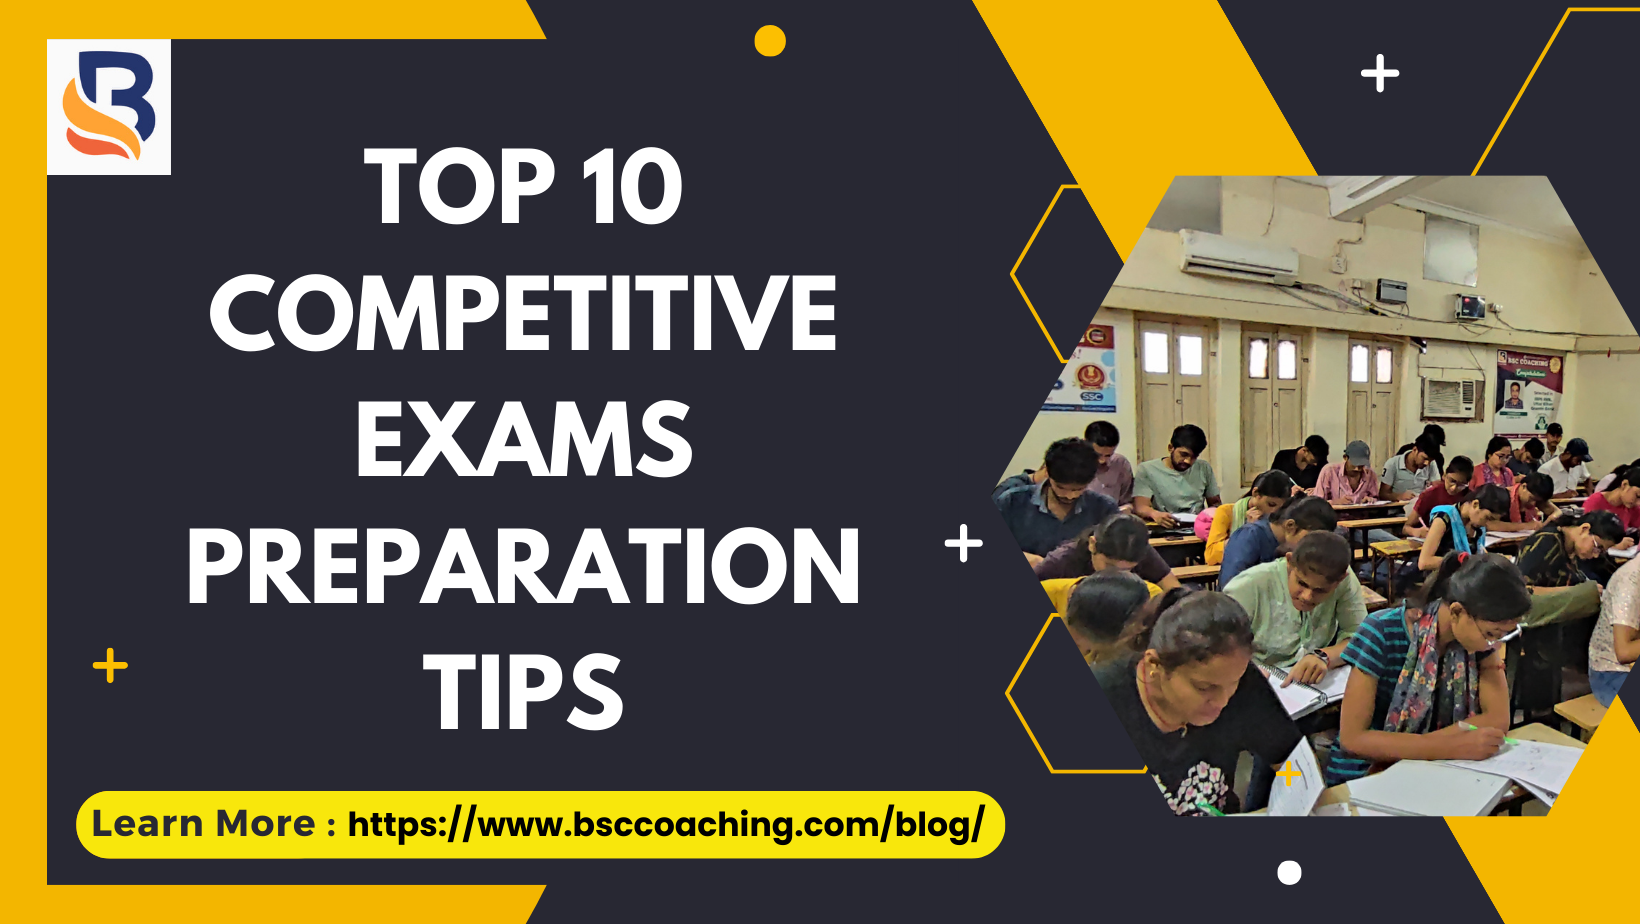 Top 10 Competitive Exams Preparation Tips